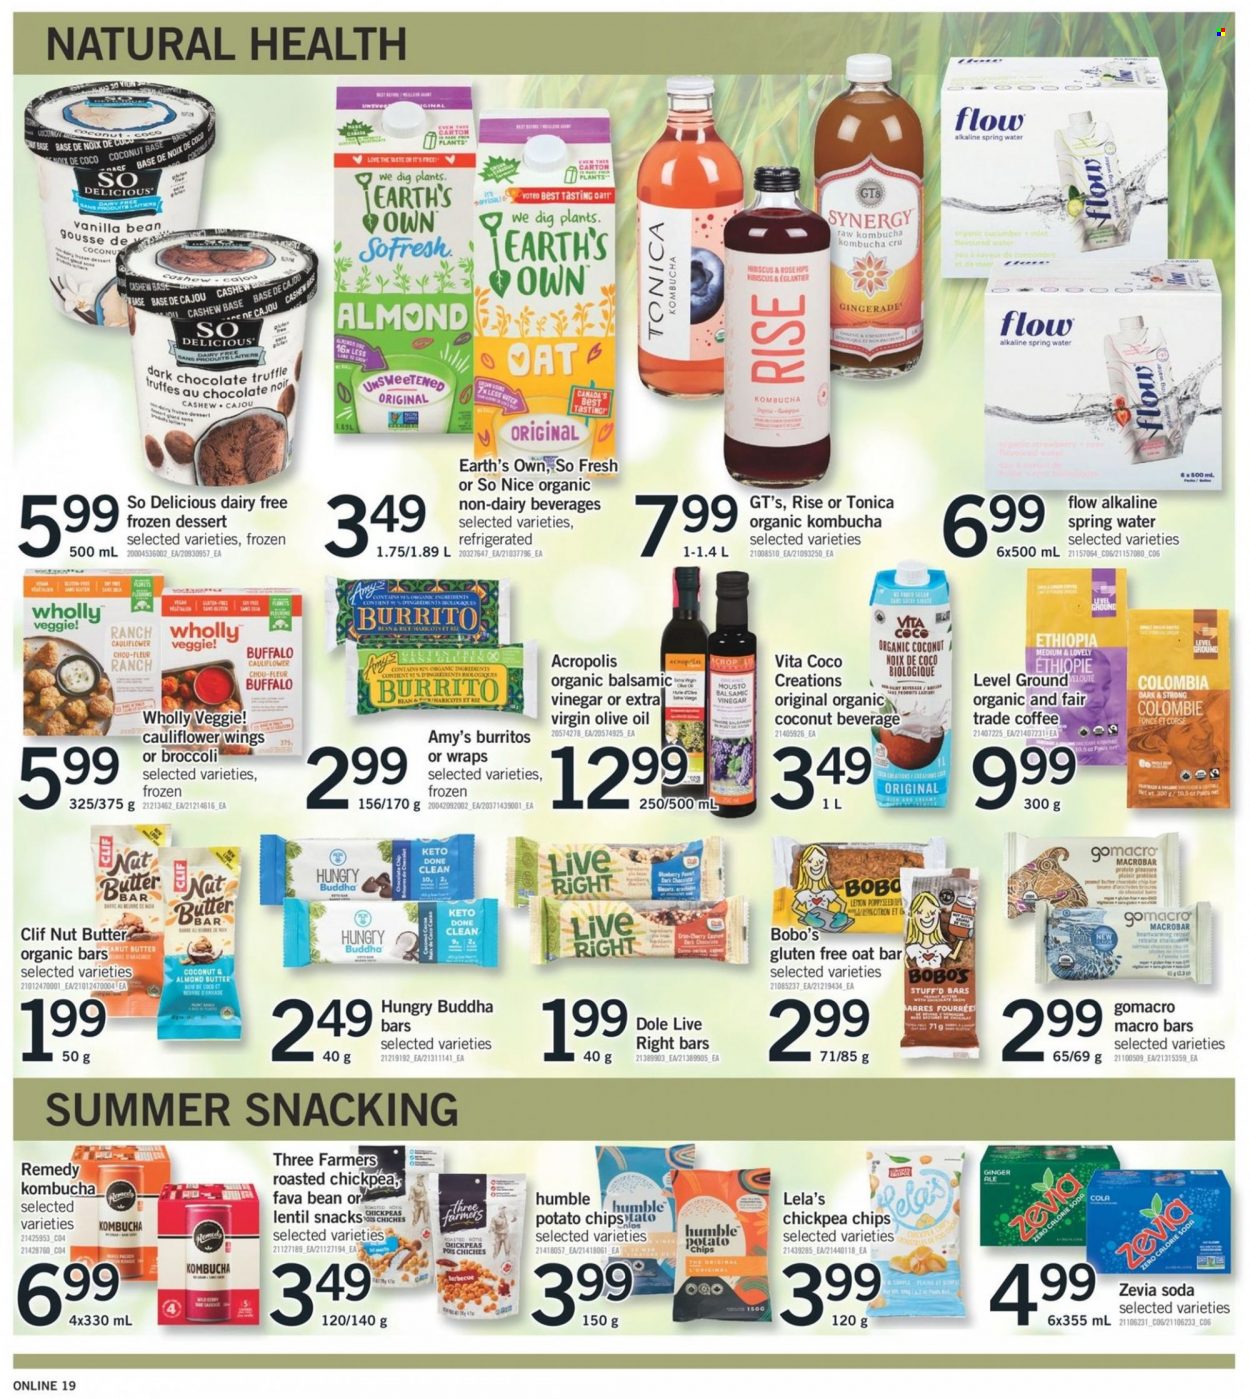 thumbnail - Fortinos Flyer - June 30, 2022 - July 06, 2022 - Sales products - wraps, fava beans, Dole, cherries, burrito, almond butter, chocolate, snack, truffles, dark chocolate, potato chips, oats, rice, chickpeas, balsamic vinegar, extra virgin olive oil, olive oil, oil, peanut butter, nut butter, almonds, ginger ale, spring water, soda, kombucha, coffee, wine, So Nice, rosé wine. Page 18.